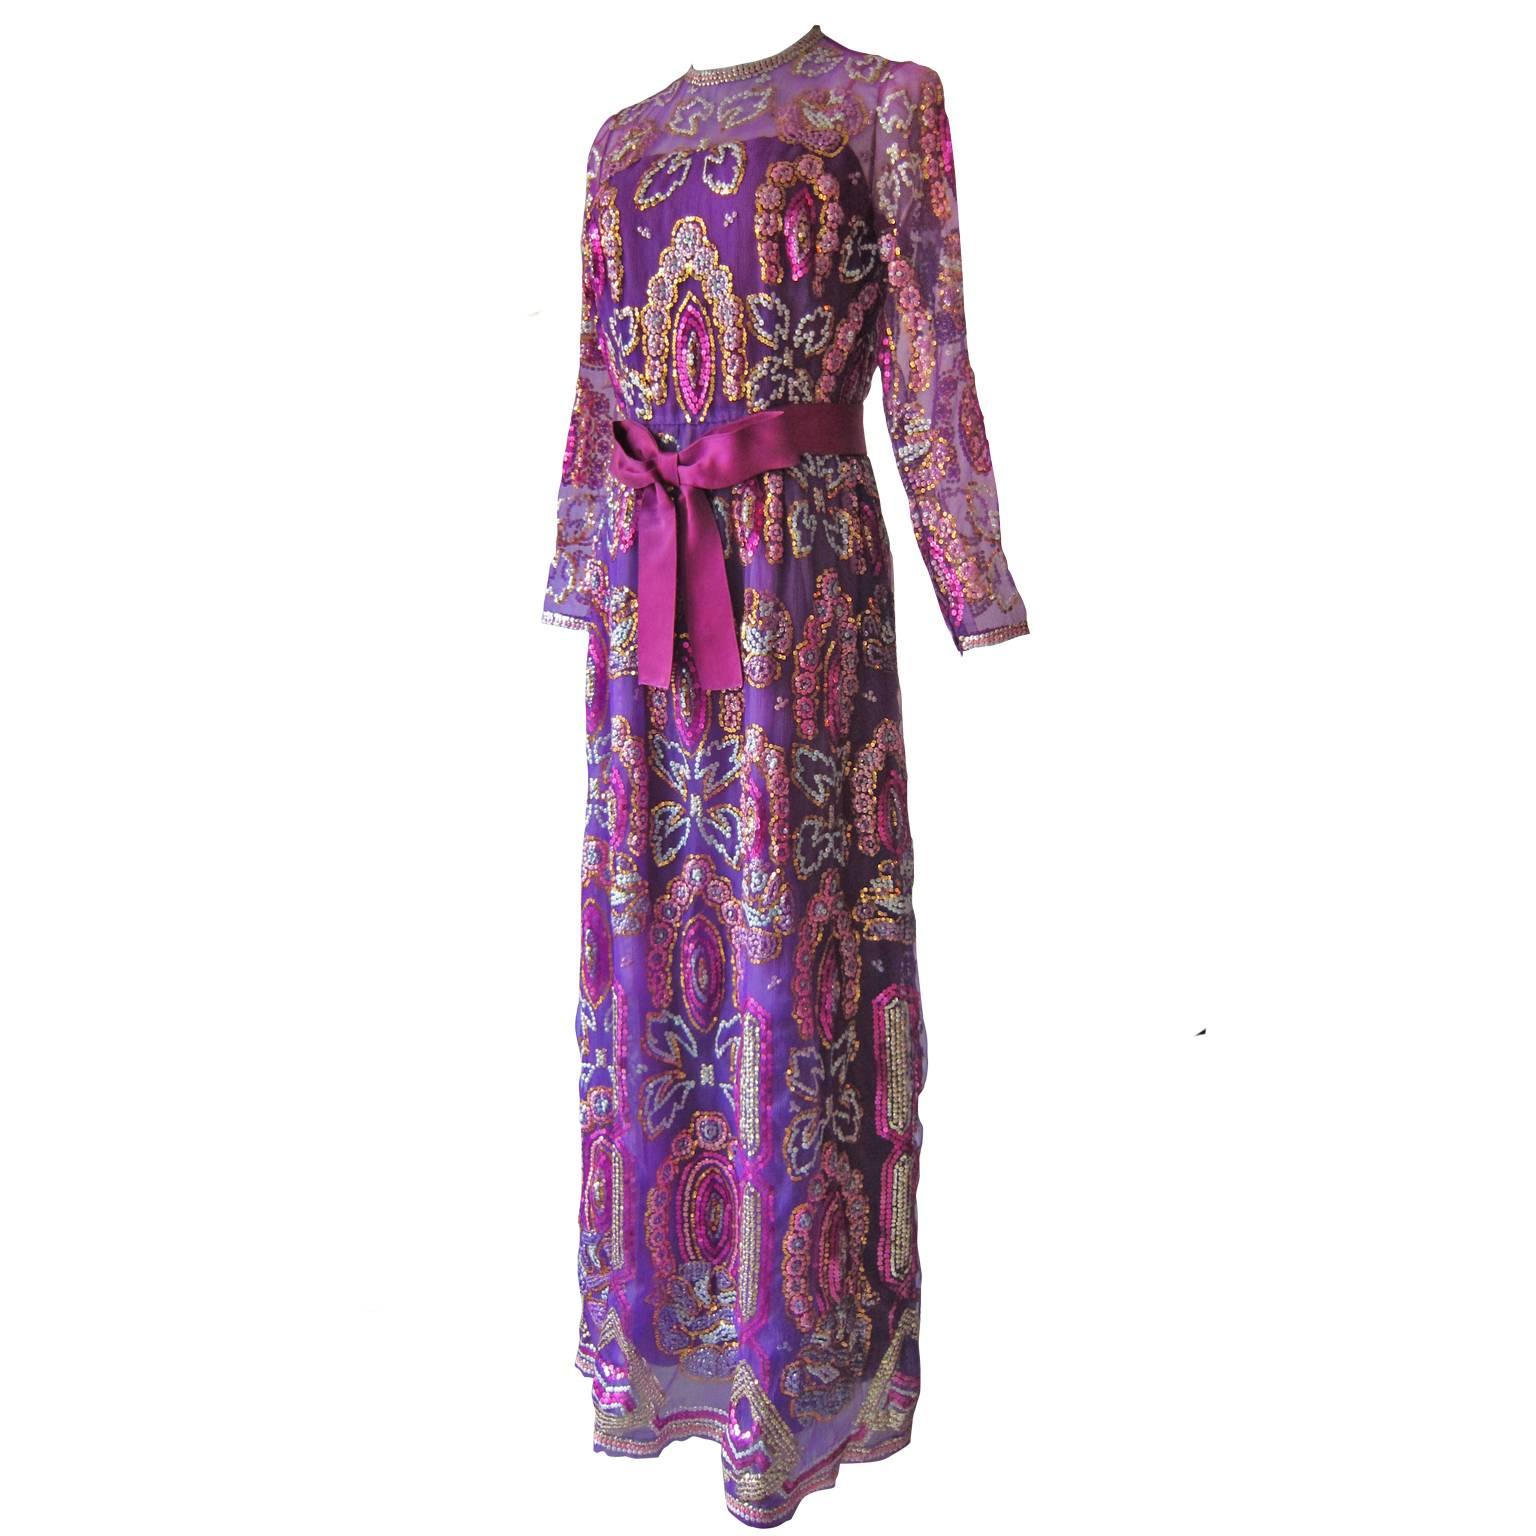 Christian Dior Haute Couture dress by Marc Bohan Automne / Hiver 1971.
An amazing violet evening gown of overall colourful sequin embroidery. 
With satin sash belt.
Fits like size 6 US, 36 - 38 EU
Measurments : 
Waist : 66 cm
Sleeve : 50 cm